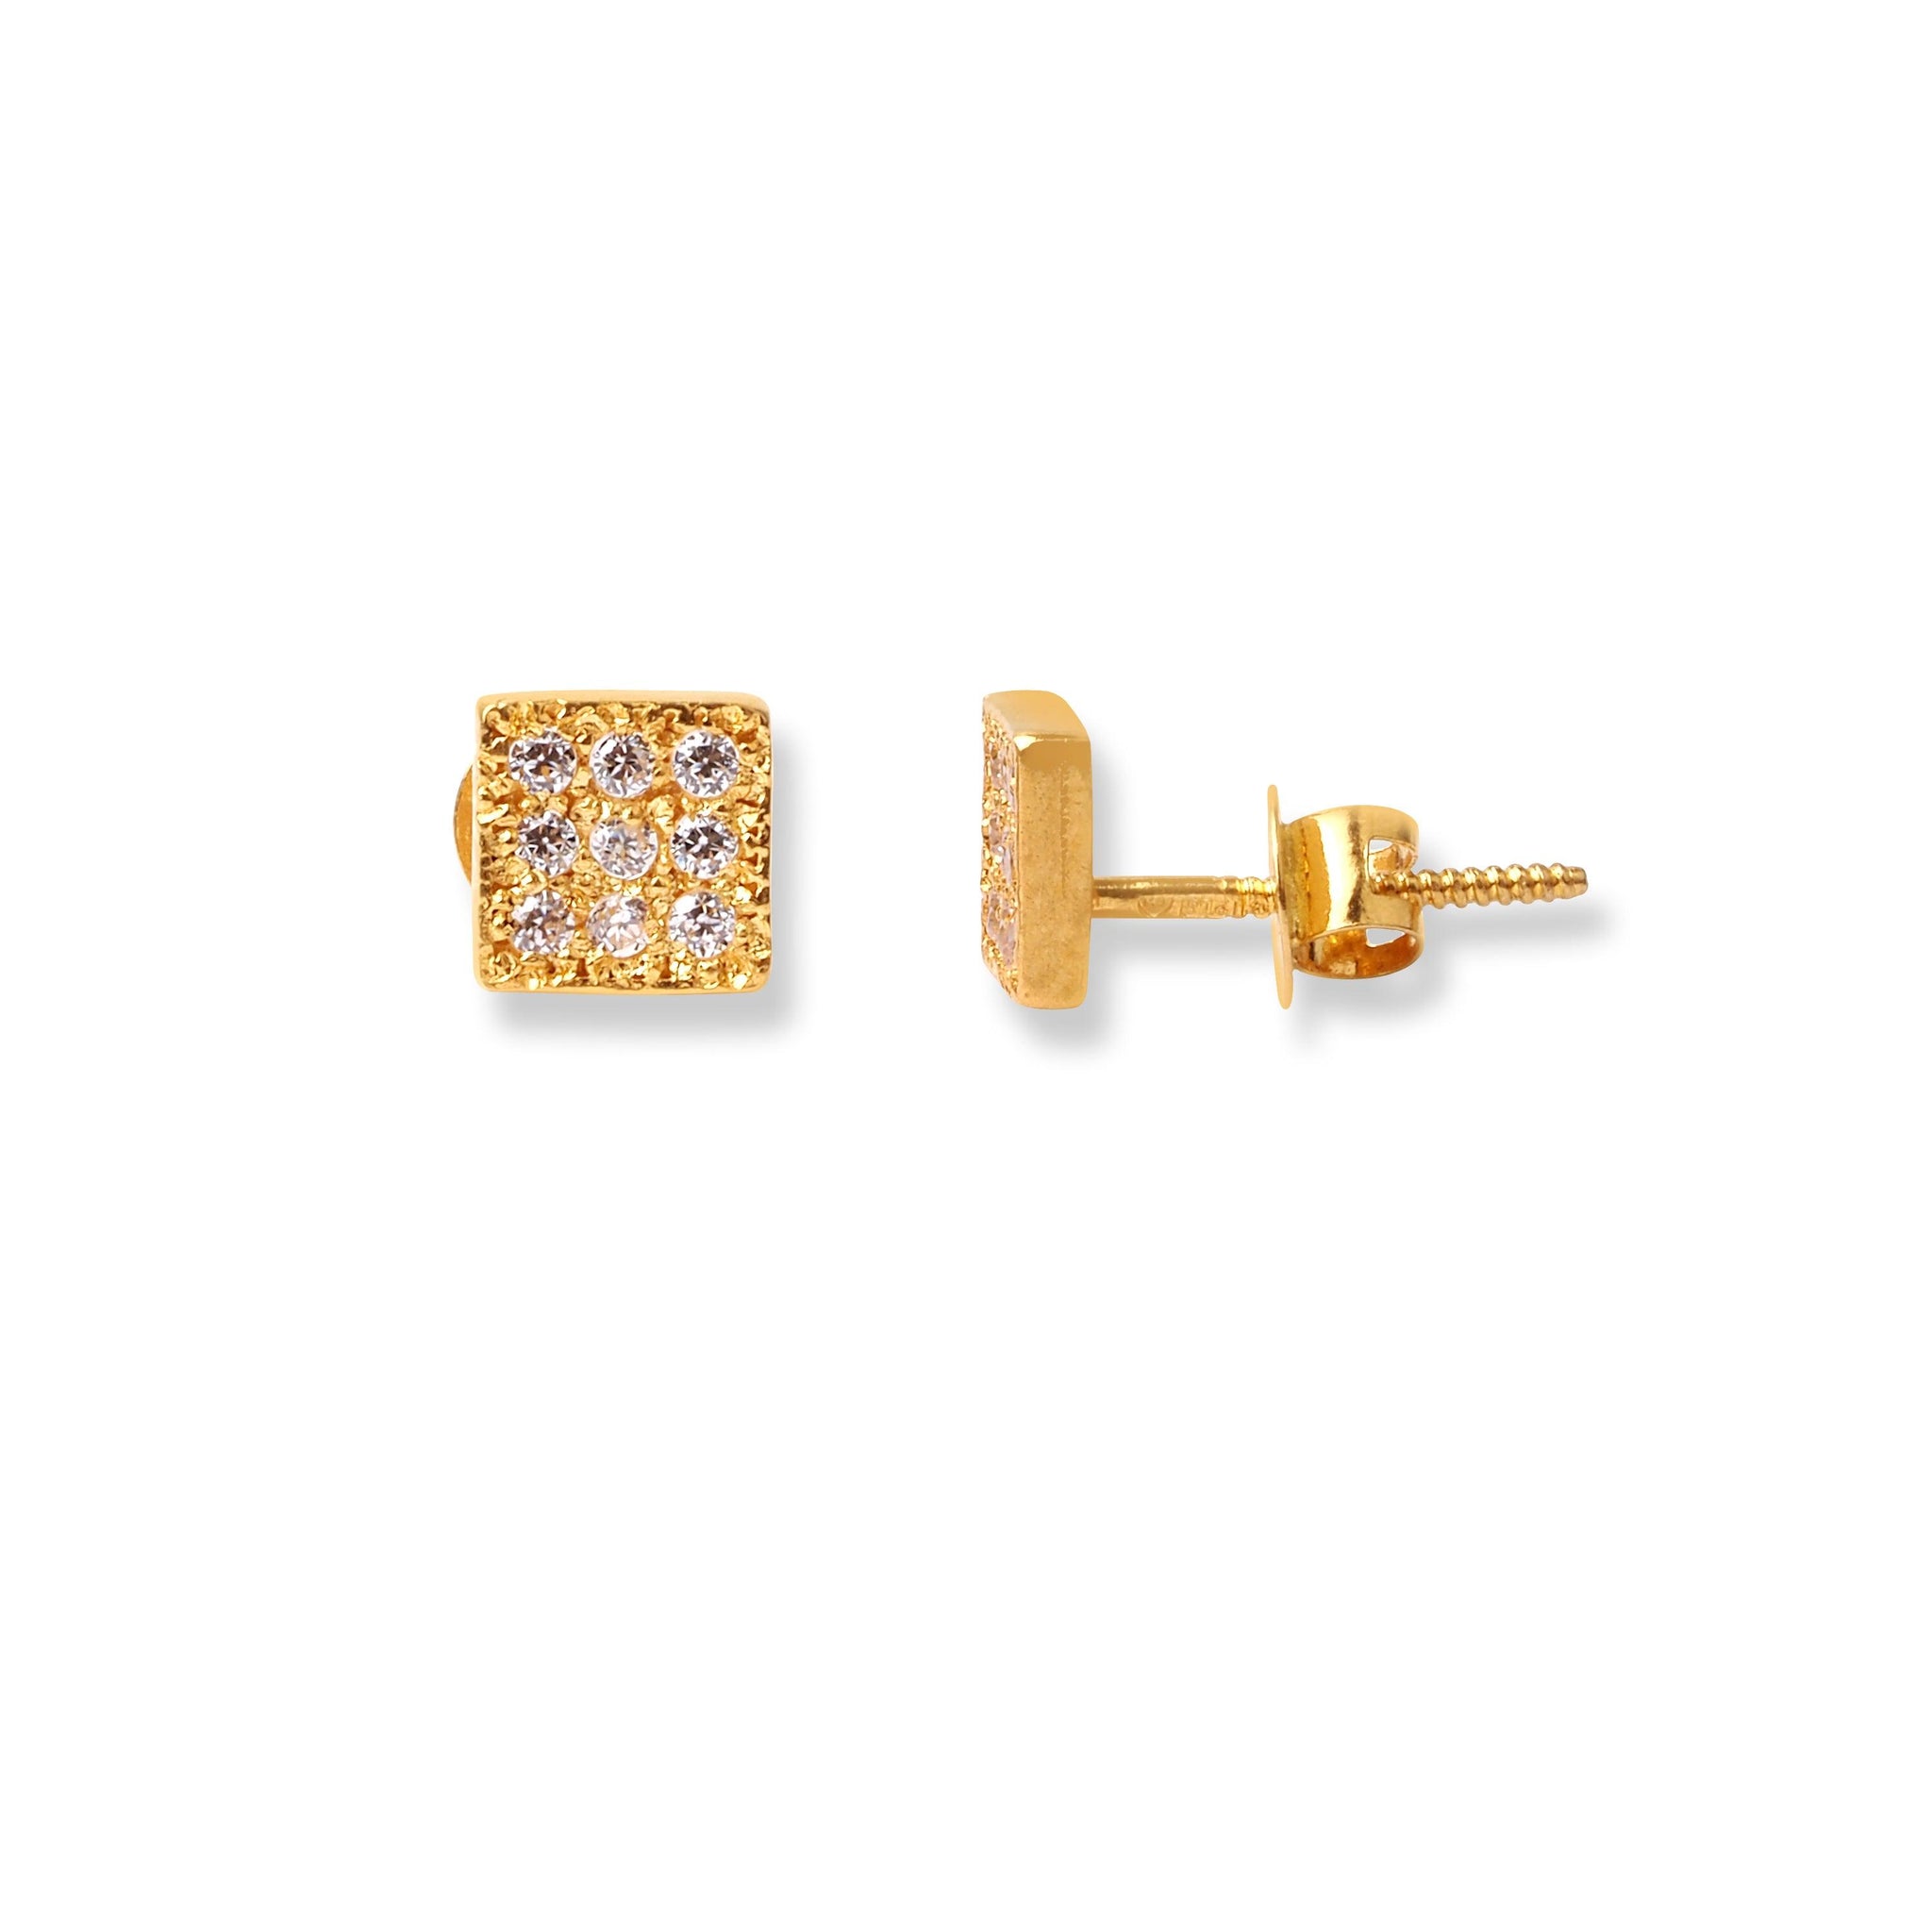 22ct Gold Cube Design Ear Studs with Cubic Zirconia Stones (0.9g)